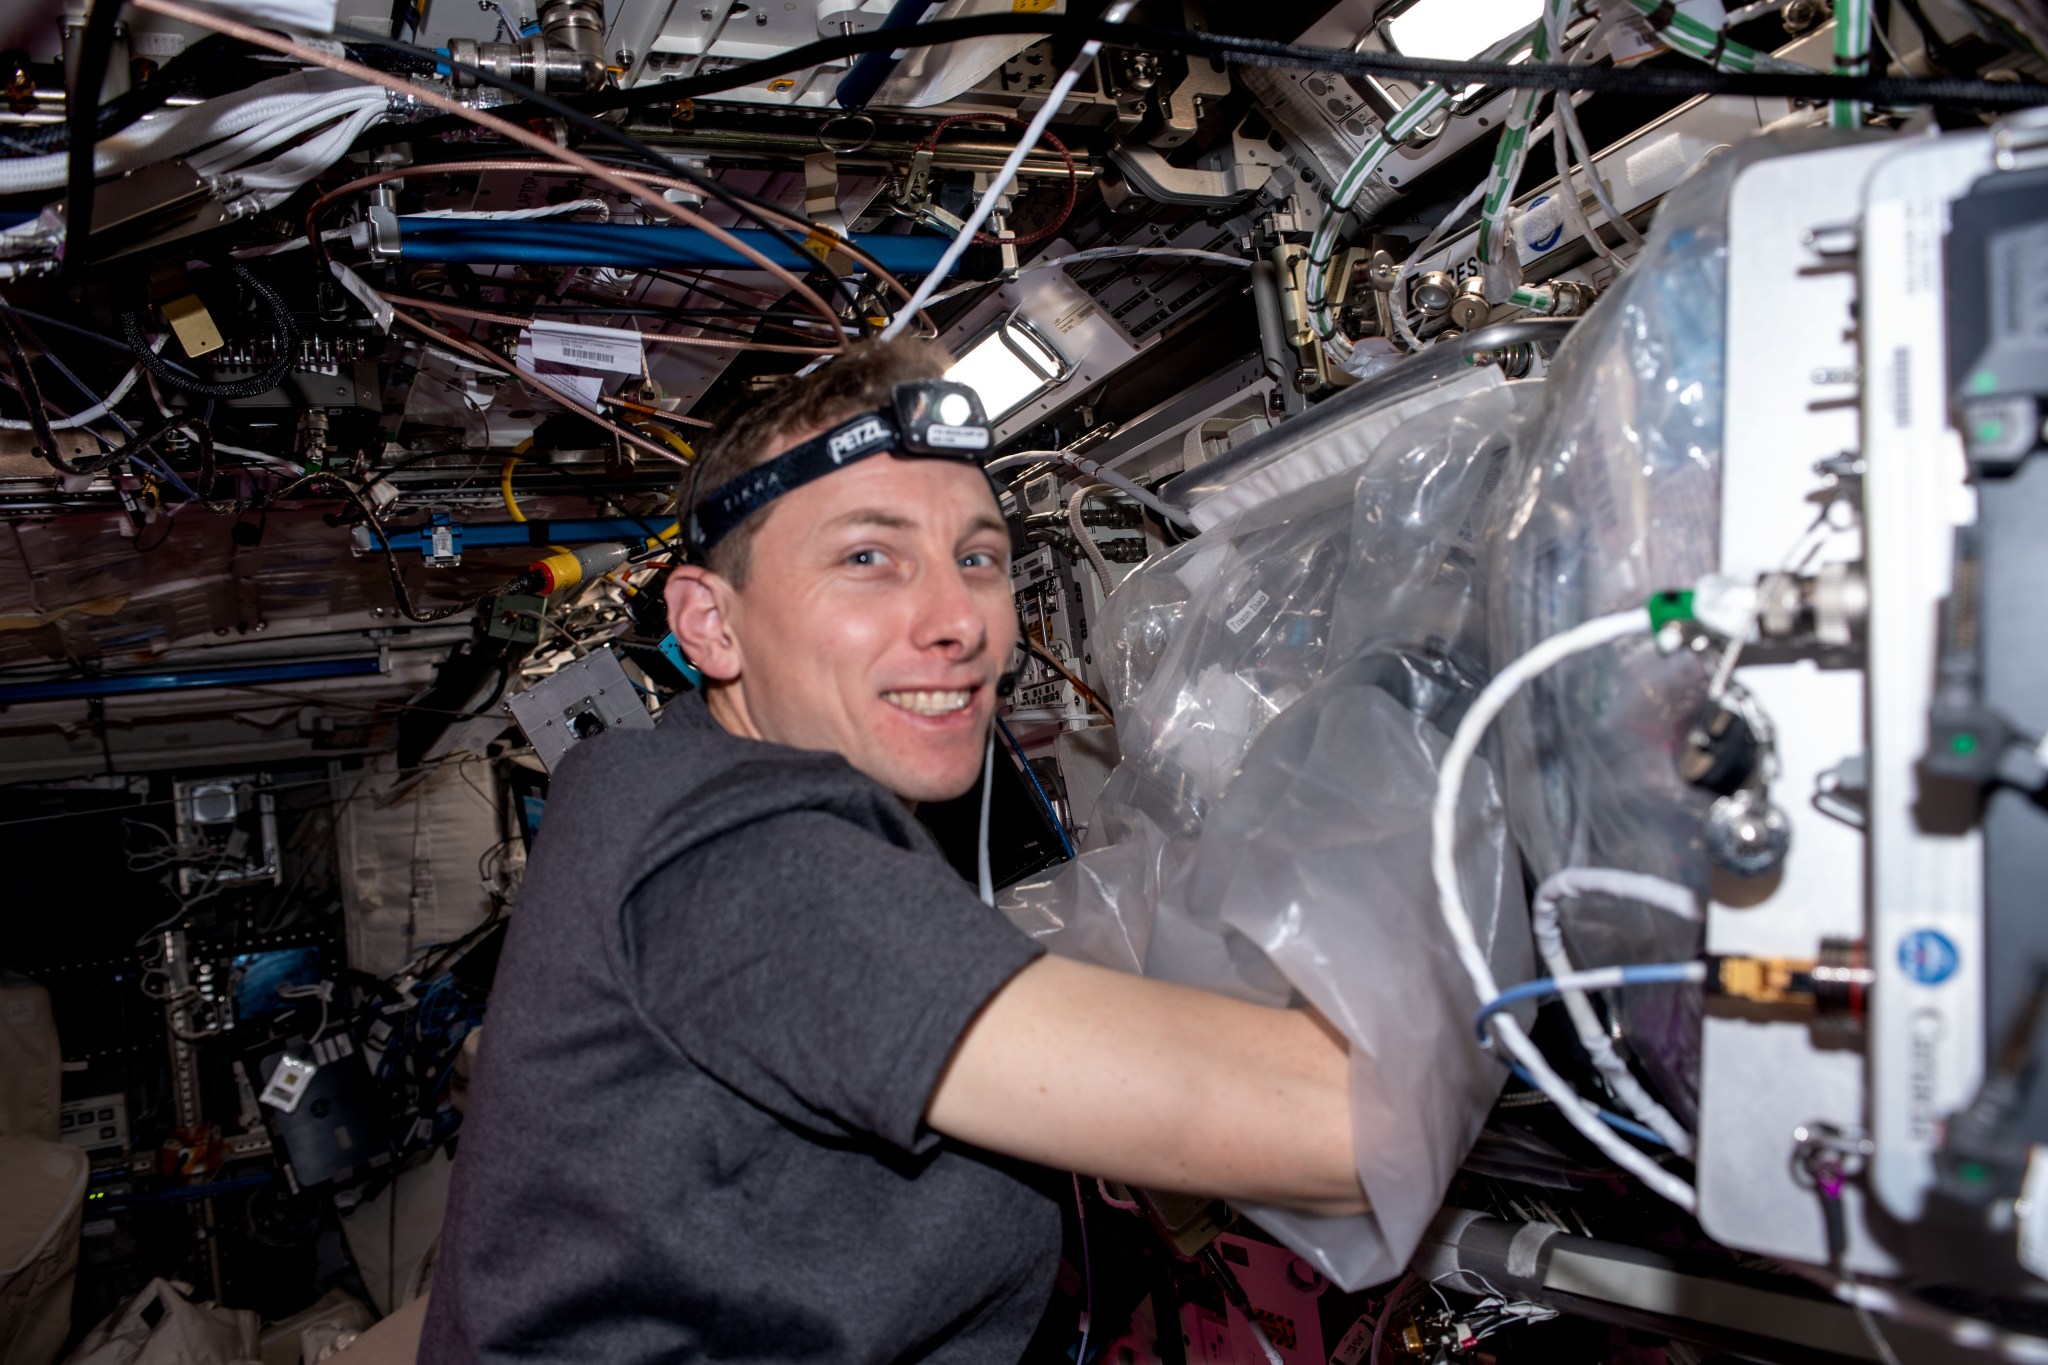 NASA astronaut Woody Hoburg installs a tissue cassette for BFF-Meniscus-2, which evaluates using bio-inks and cells to 3D print knee cartilage tissue in space.